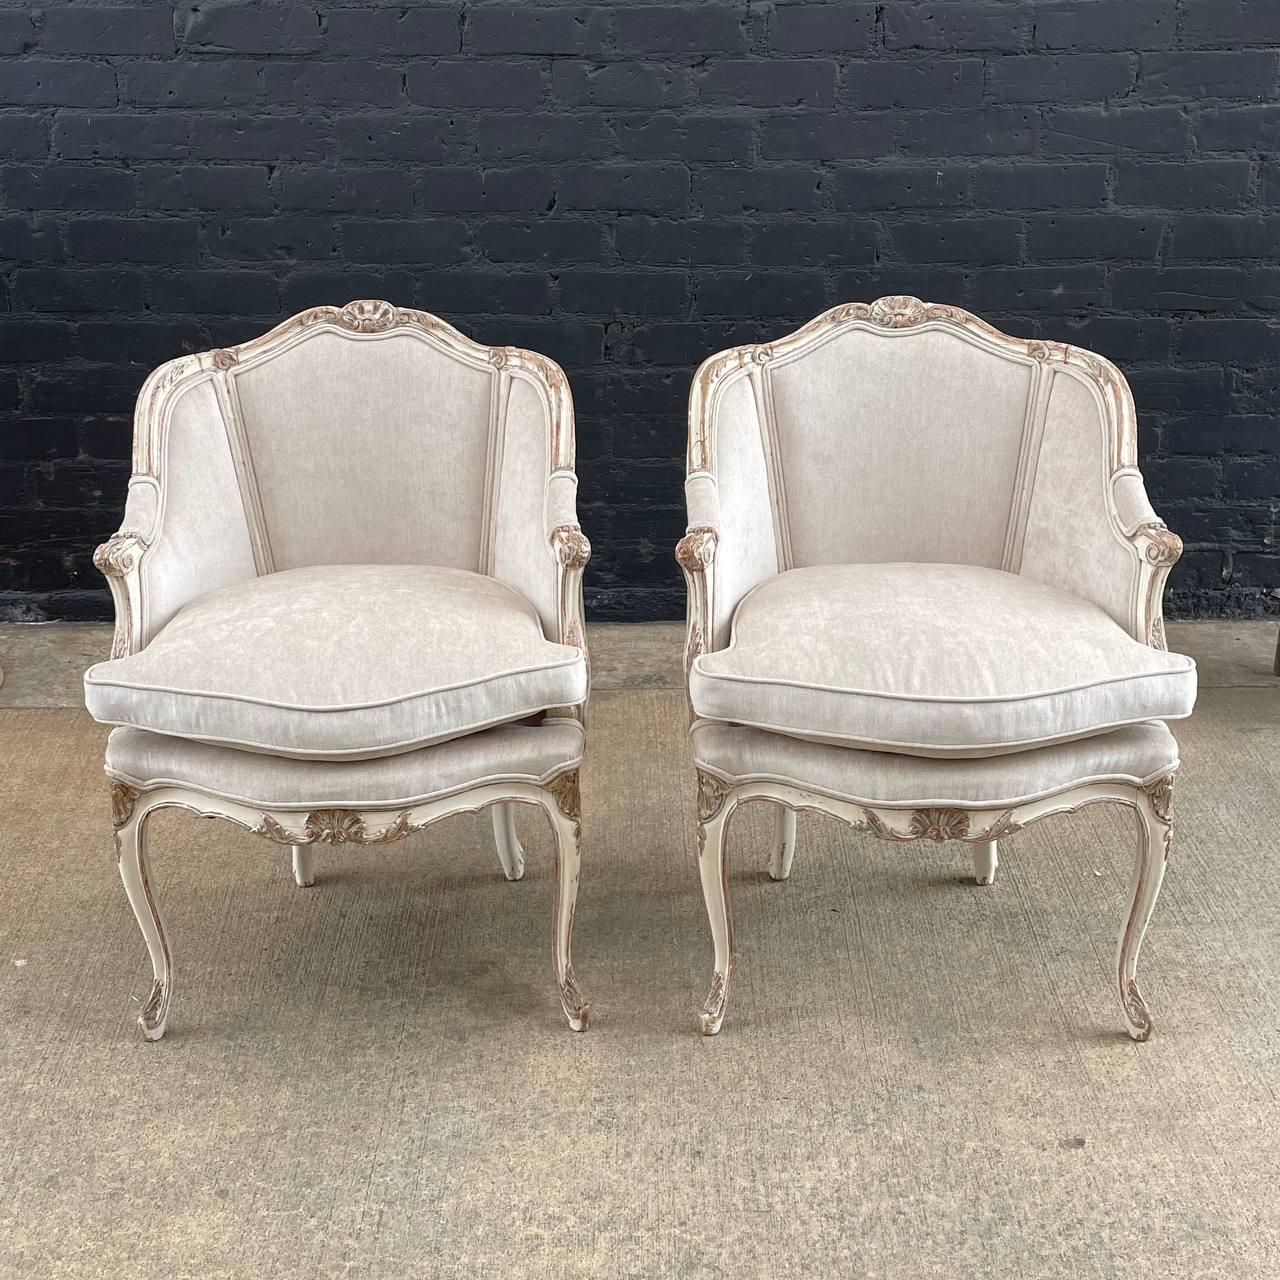 Pair of French Louis XV style Painted and Parcel-Gilt Armchairs

Country: French
Materials: Carved Wood
Condition: Newly Upholstered
Style: French Louis XV
Year: 1940’s

$4,500 pair 

Dimensions:
35.50”H x 25.50”W x 26”D
Seat Height 21“.